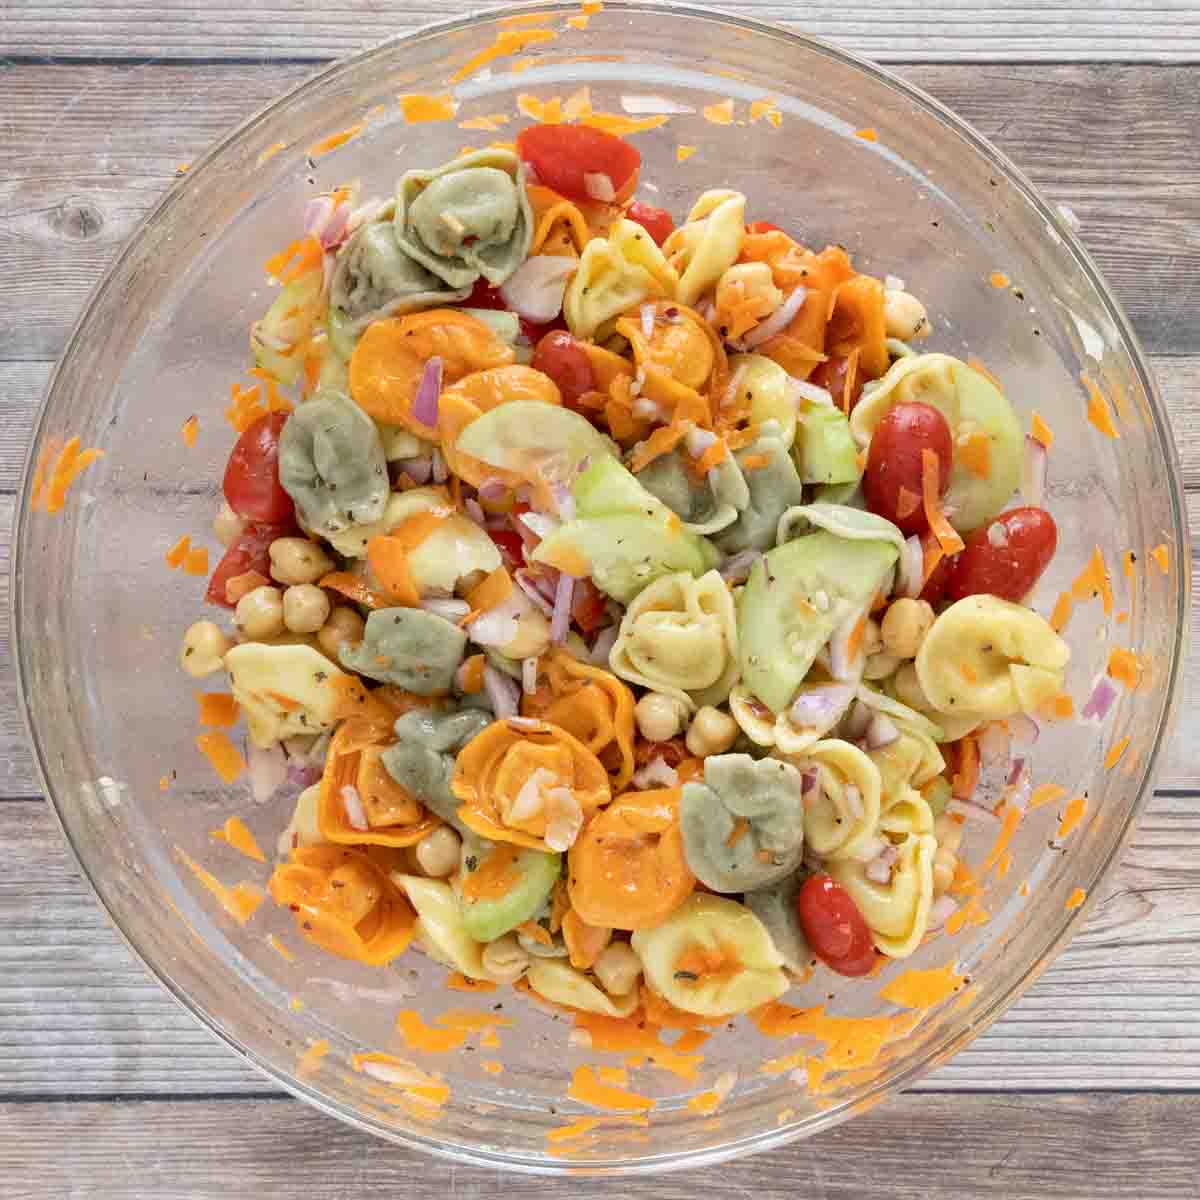 Finished pasta salad in a glass bowl.